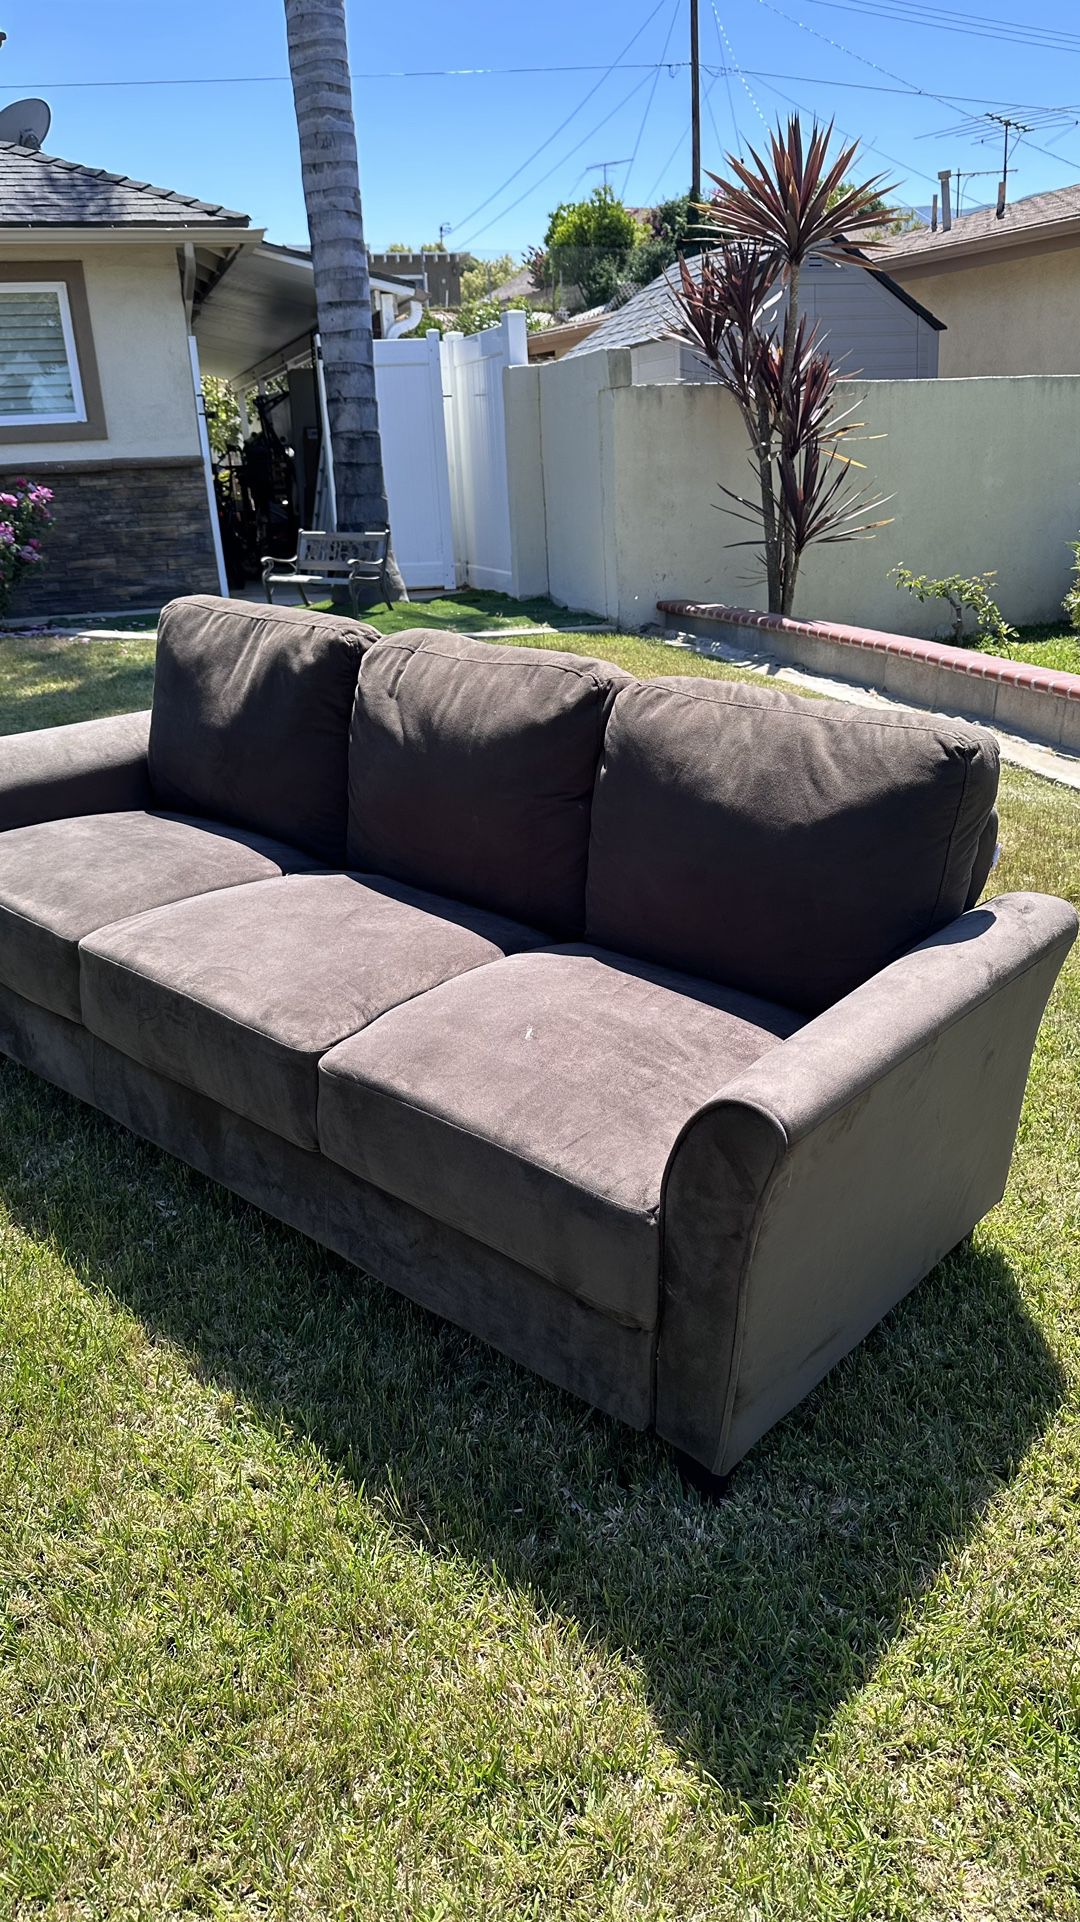 Lifestyle Solutions Sofa (comes Apart)